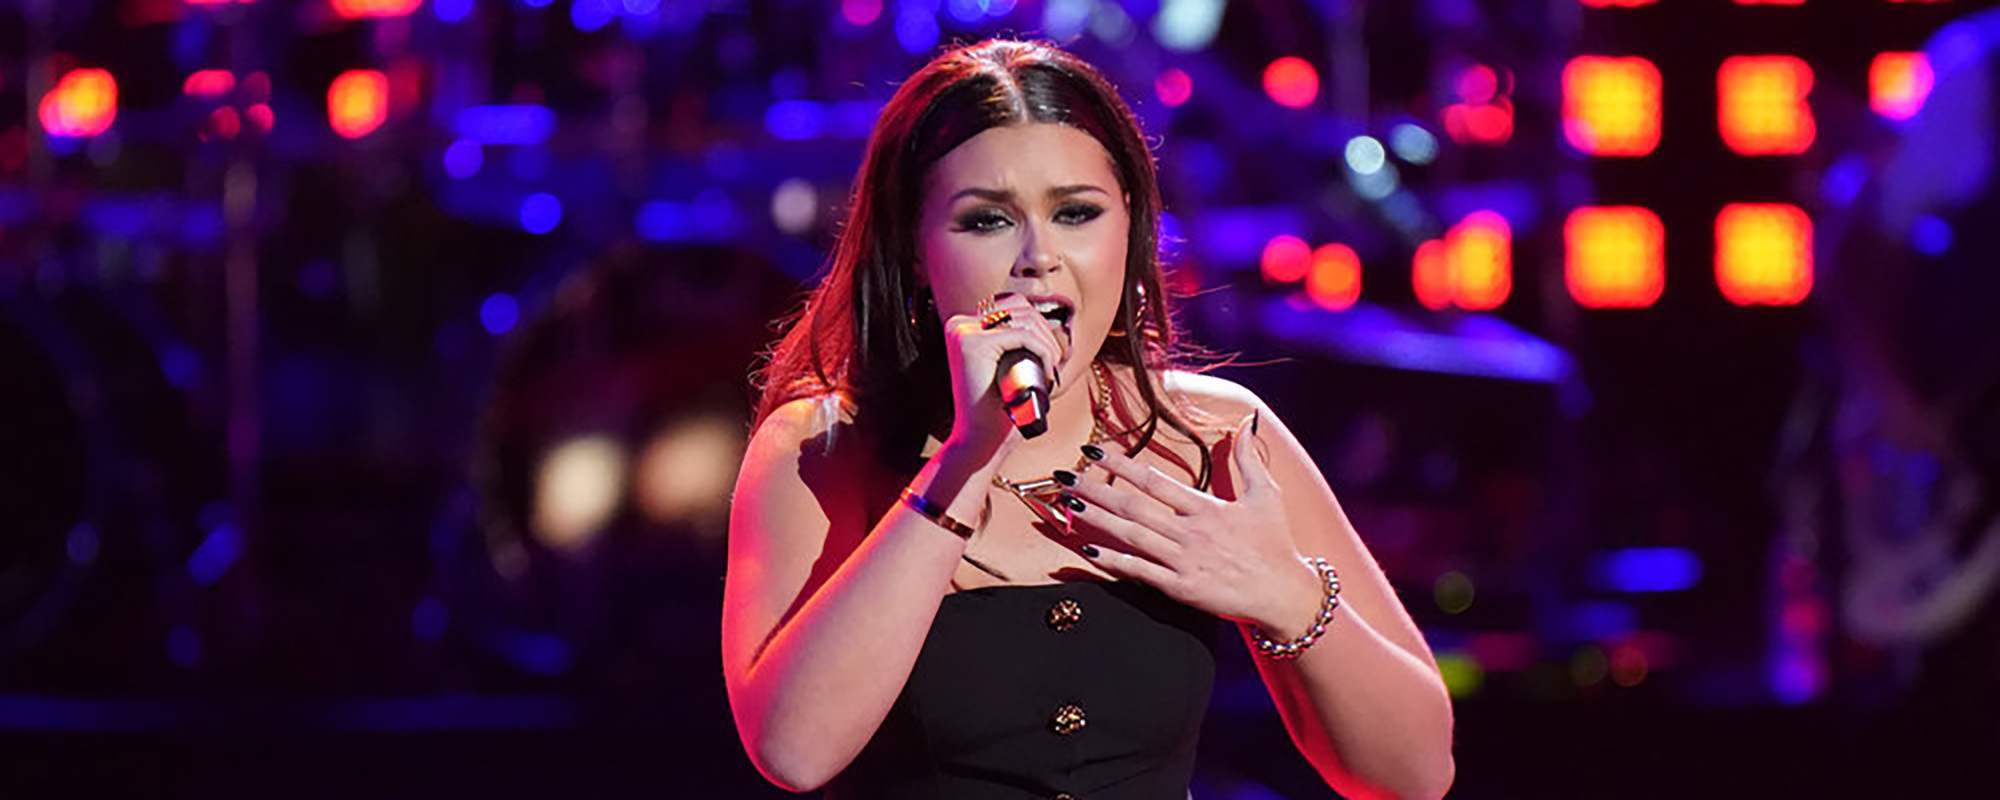 Watch: Olivia Minogue Gives Eerie Performance of Evanescence’s “Bring Me To Life” on ‘The Voice’